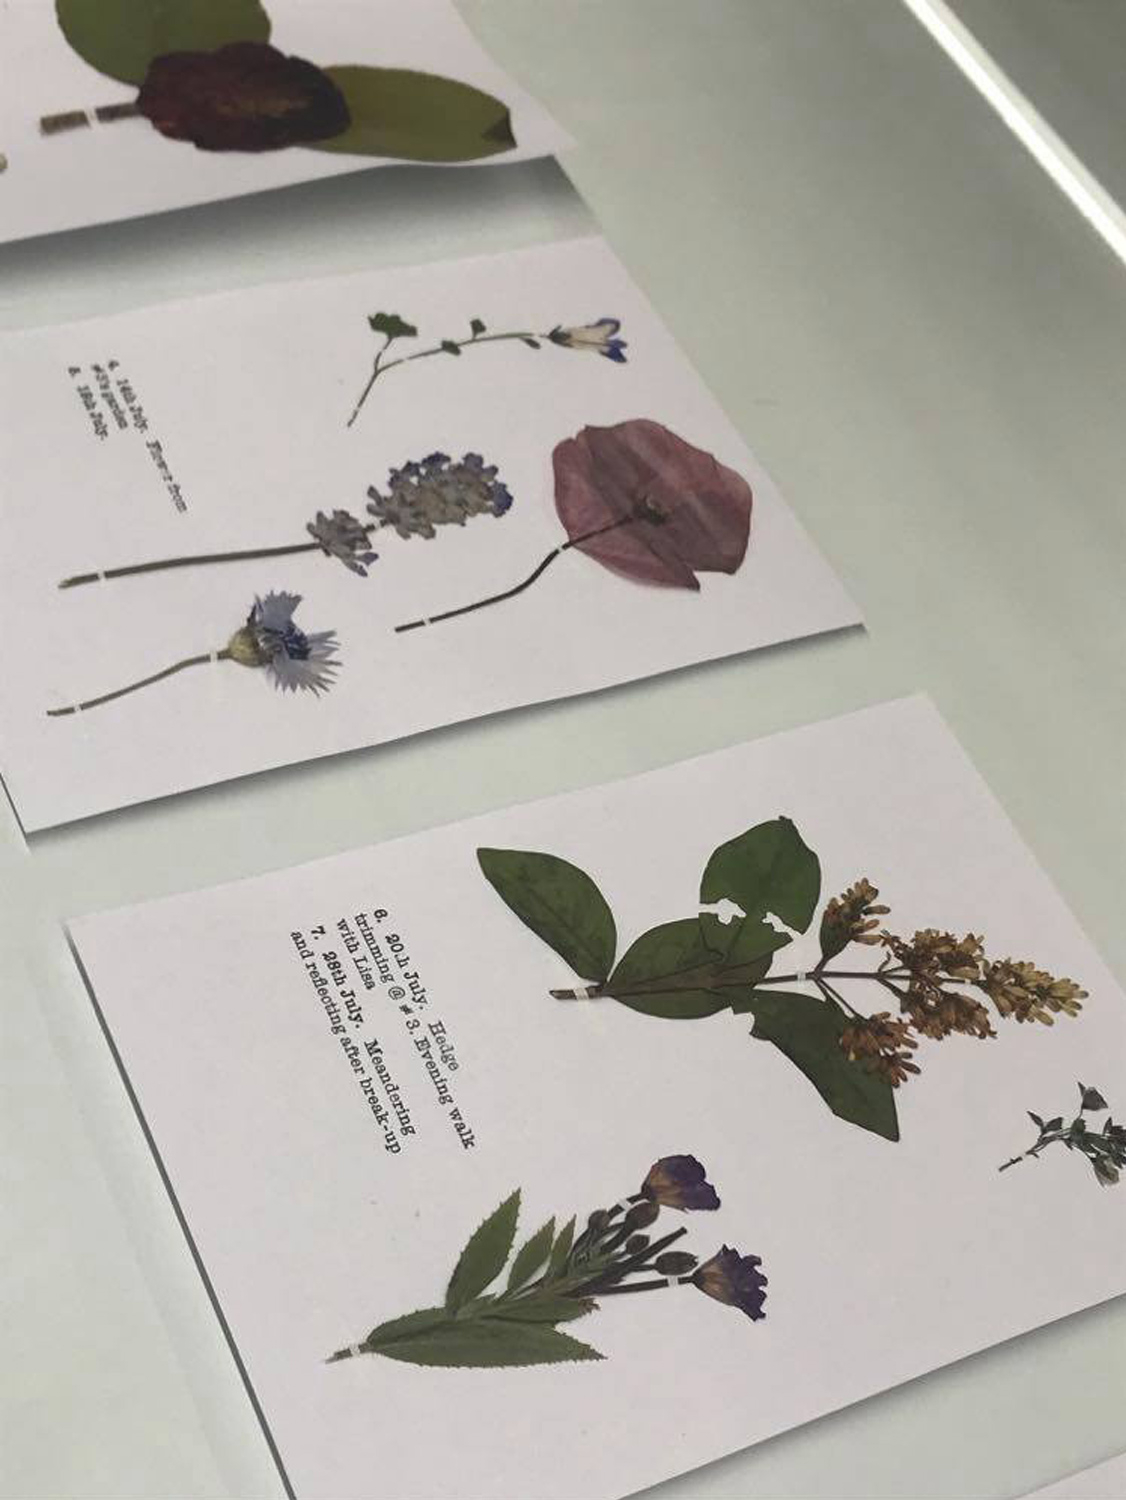 A snapshot of personal diary entries in letterpress with pressed flora mementos. 